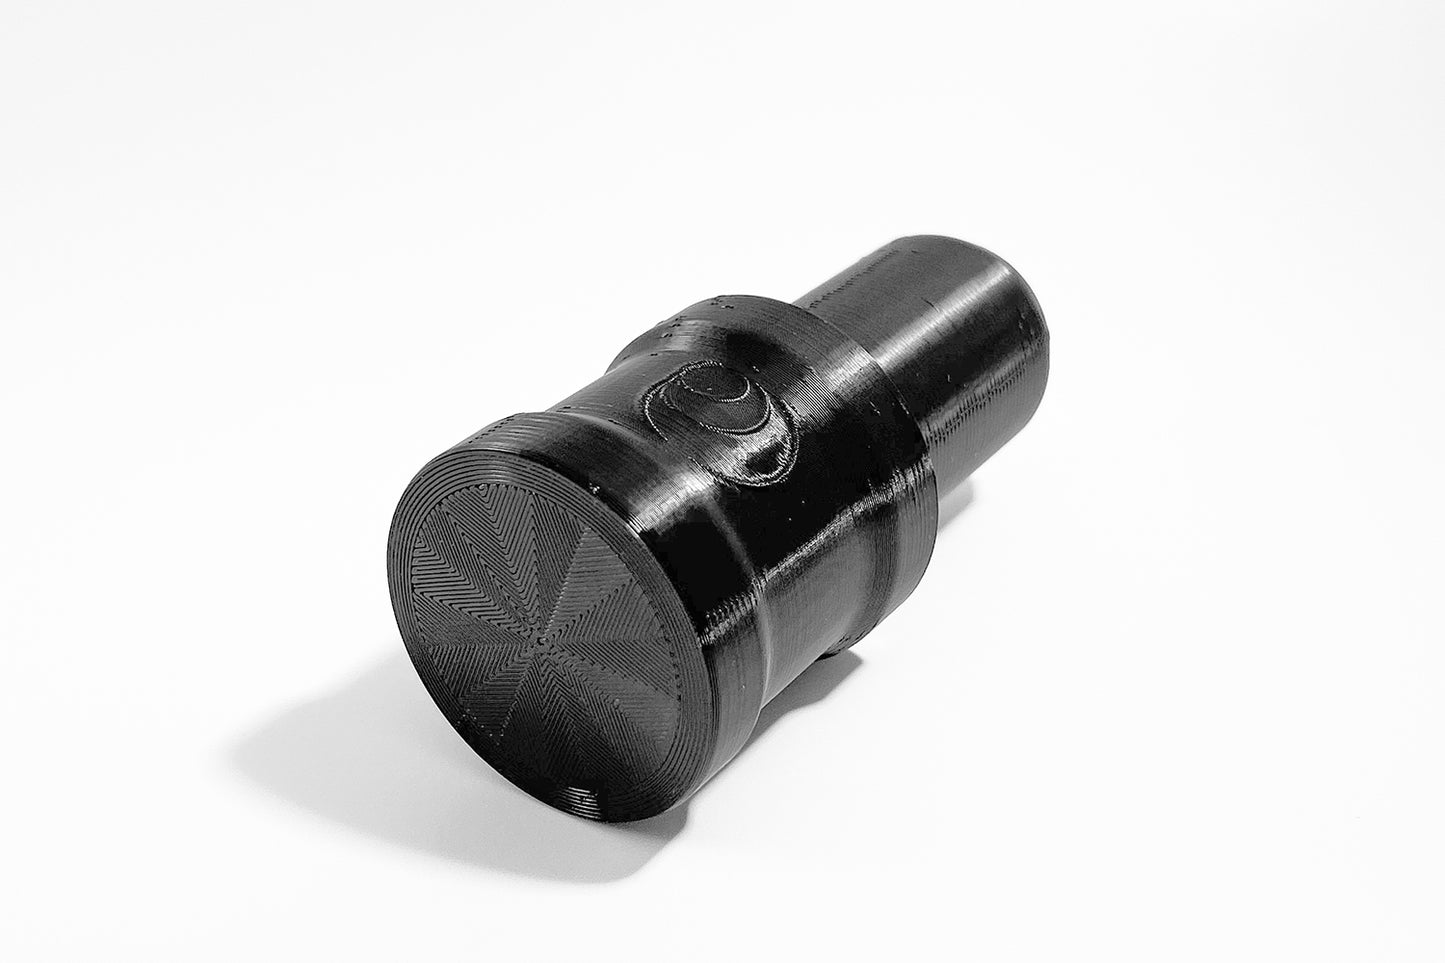 Top view of Momentum Cycle's Fork Seal Driver Tool. Quality 3D printed MTB tools for Home Mechanics, made in Canada.